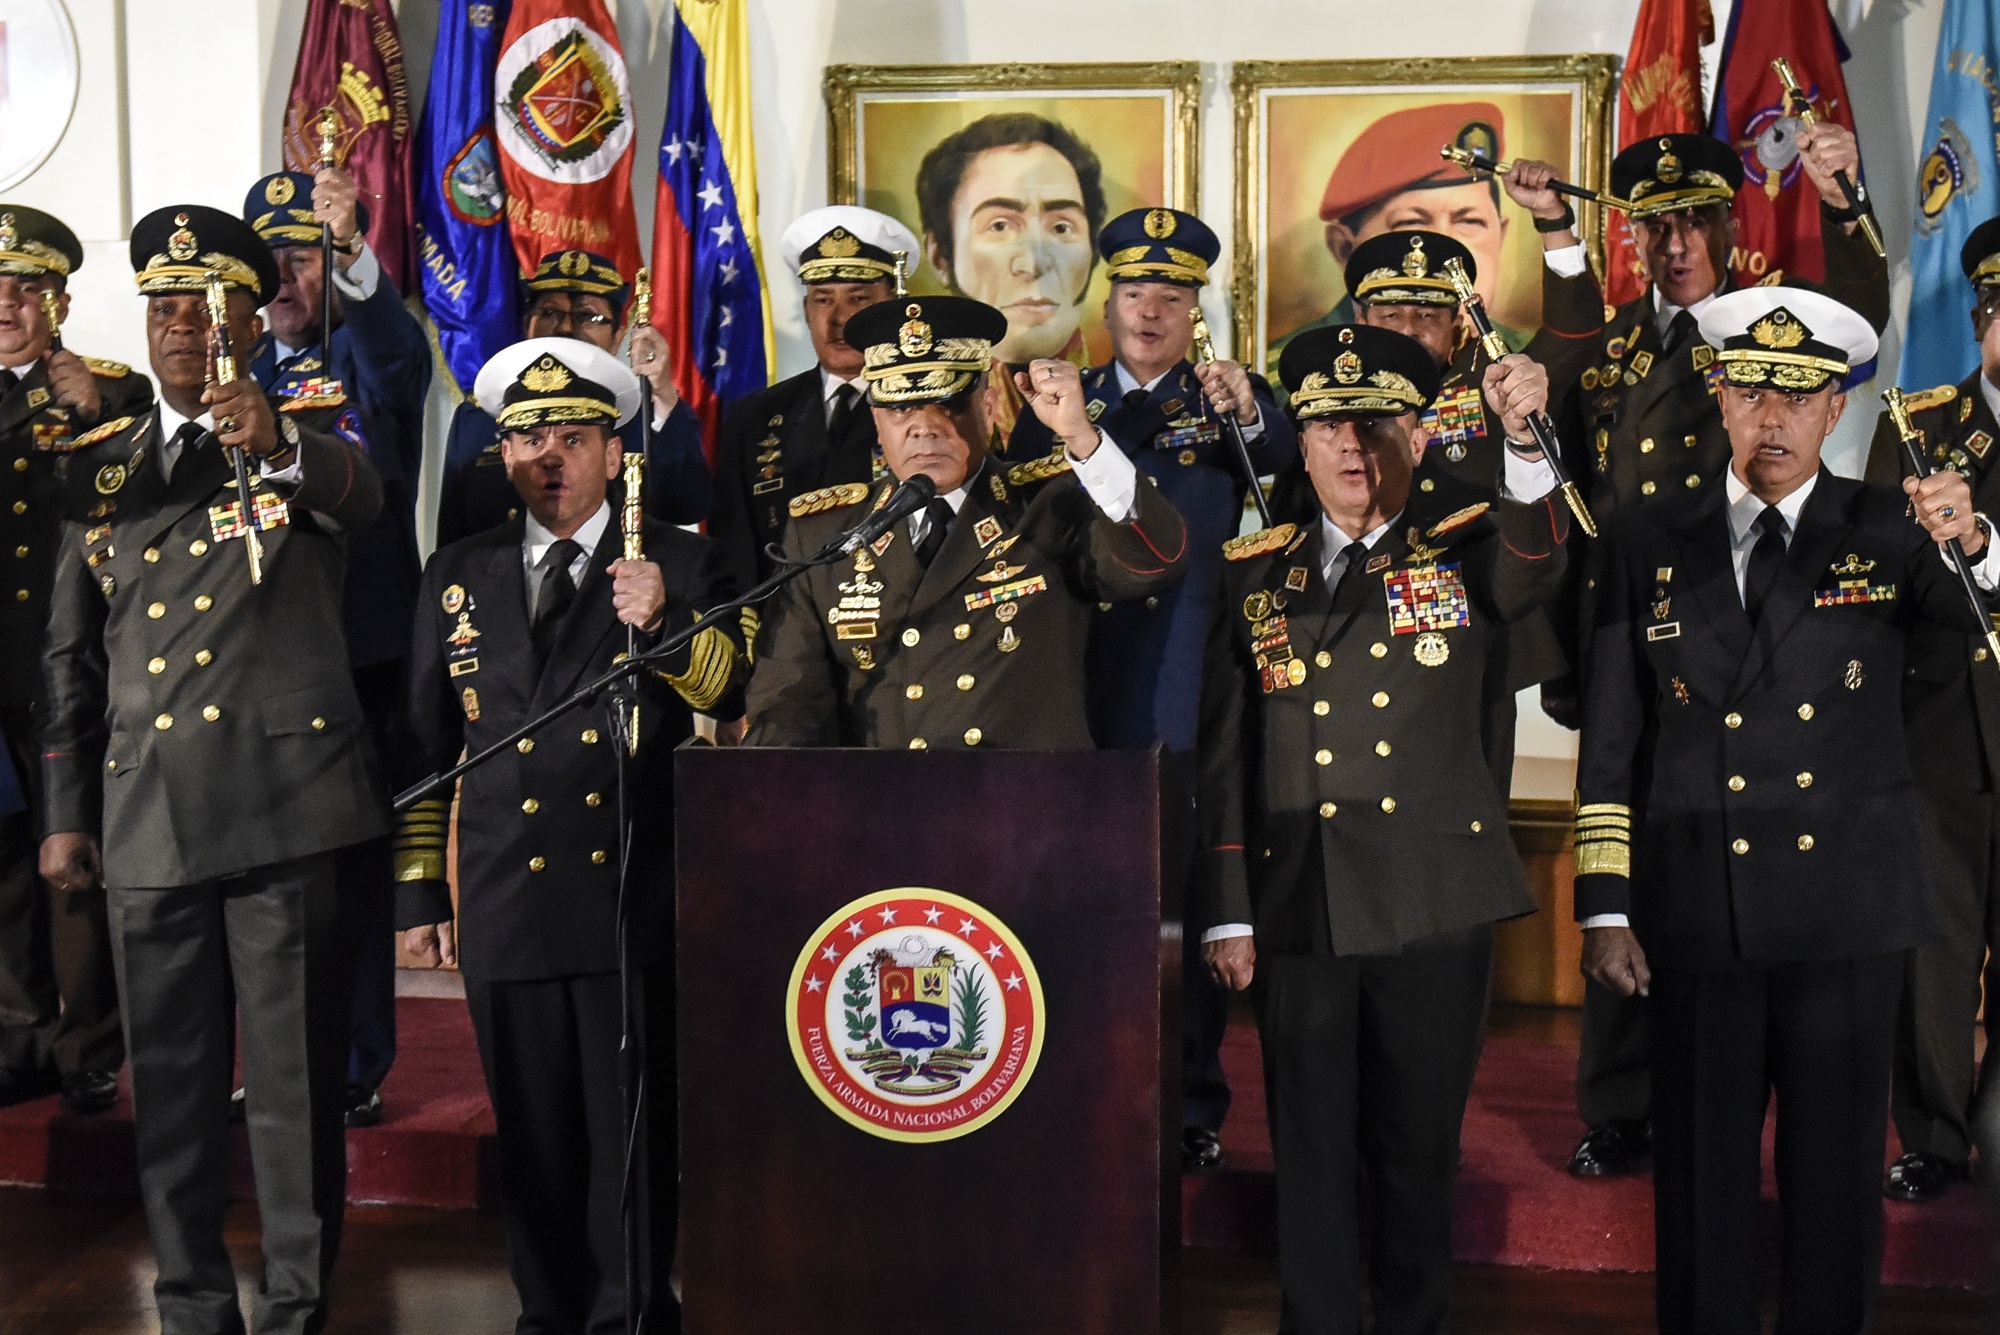 Vladimir Padrino Lopez, Venezuela's defense minister, center, gestures while speaking during a press conference accompanied by the military high command at the Ministry of Defense in Caracas, Venezuela, on Jan. 24.&nbsp;